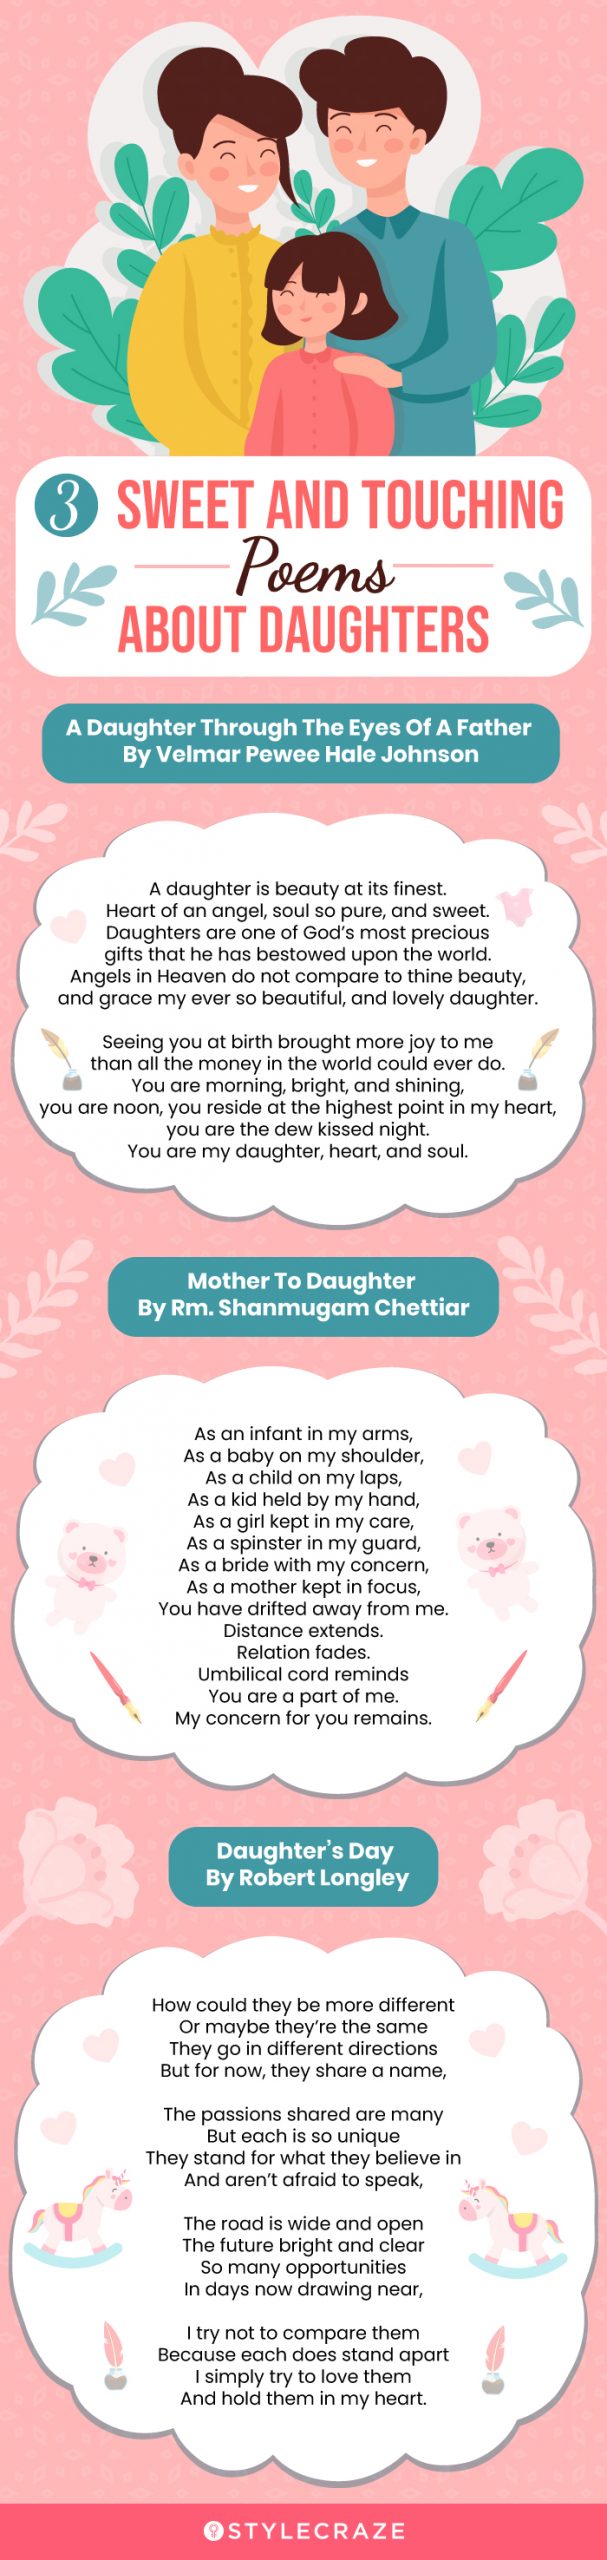 sweet and touching poems about daughters (infographic)